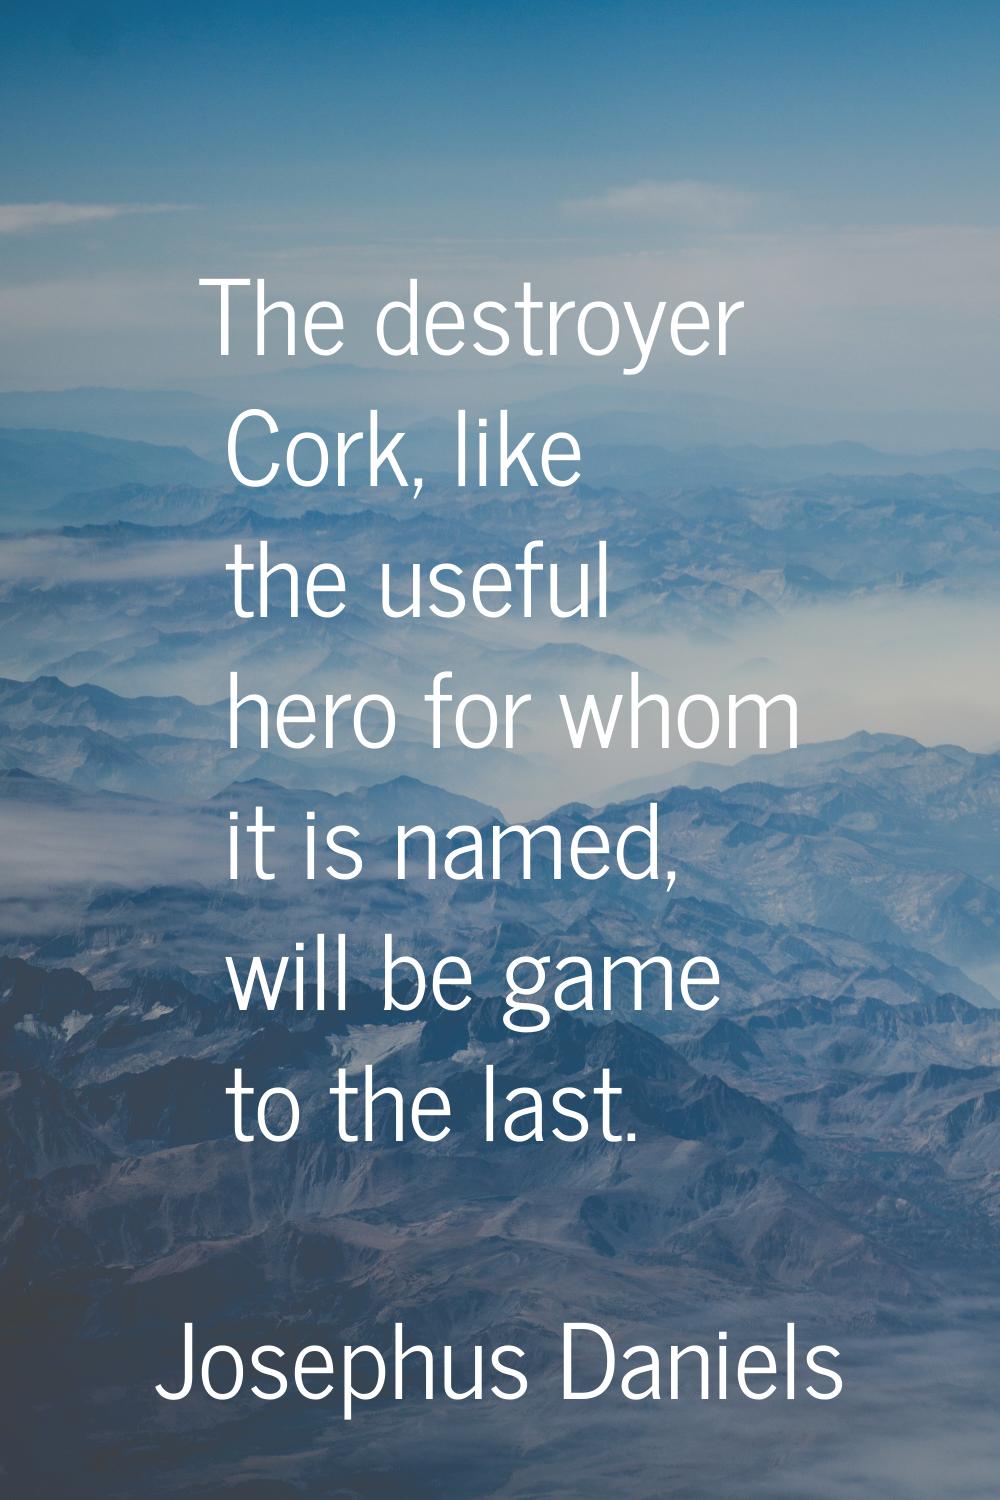 The destroyer Cork, like the useful hero for whom it is named, will be game to the last.